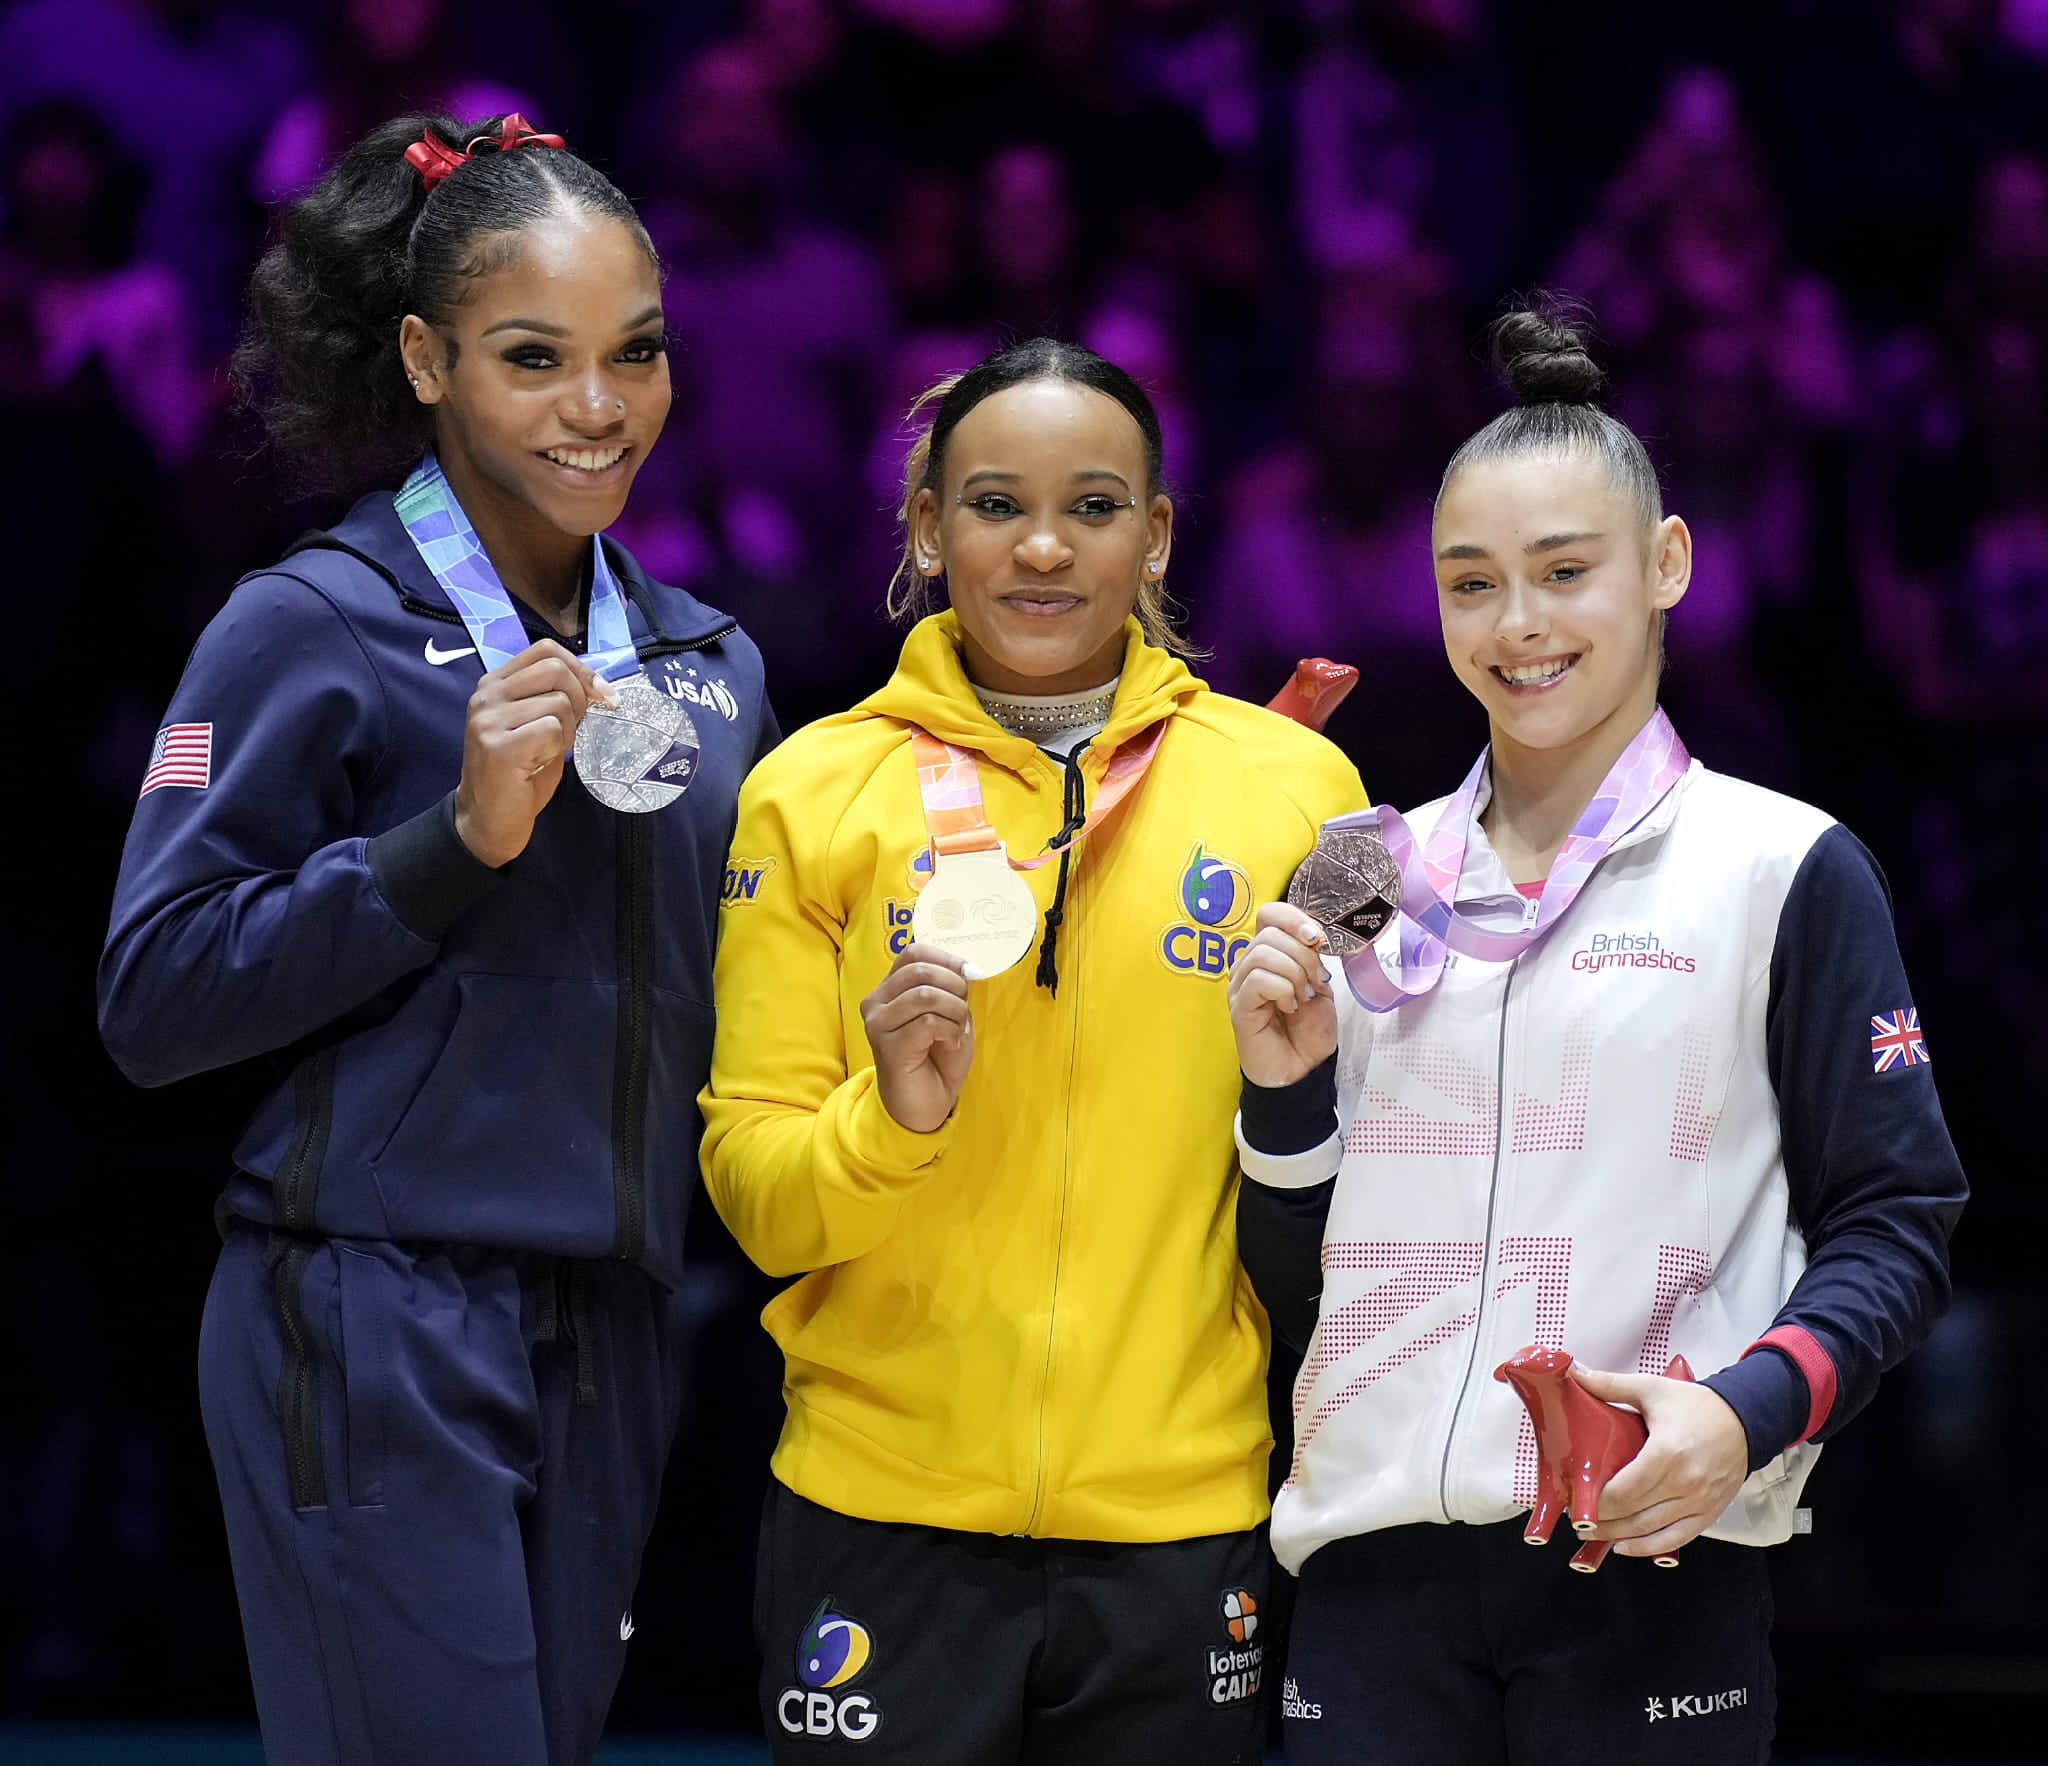 Rebeca Andrade Achieved a Historic Margin of Victory at the 2022 World Championships – An Old School Gymnastics Blog